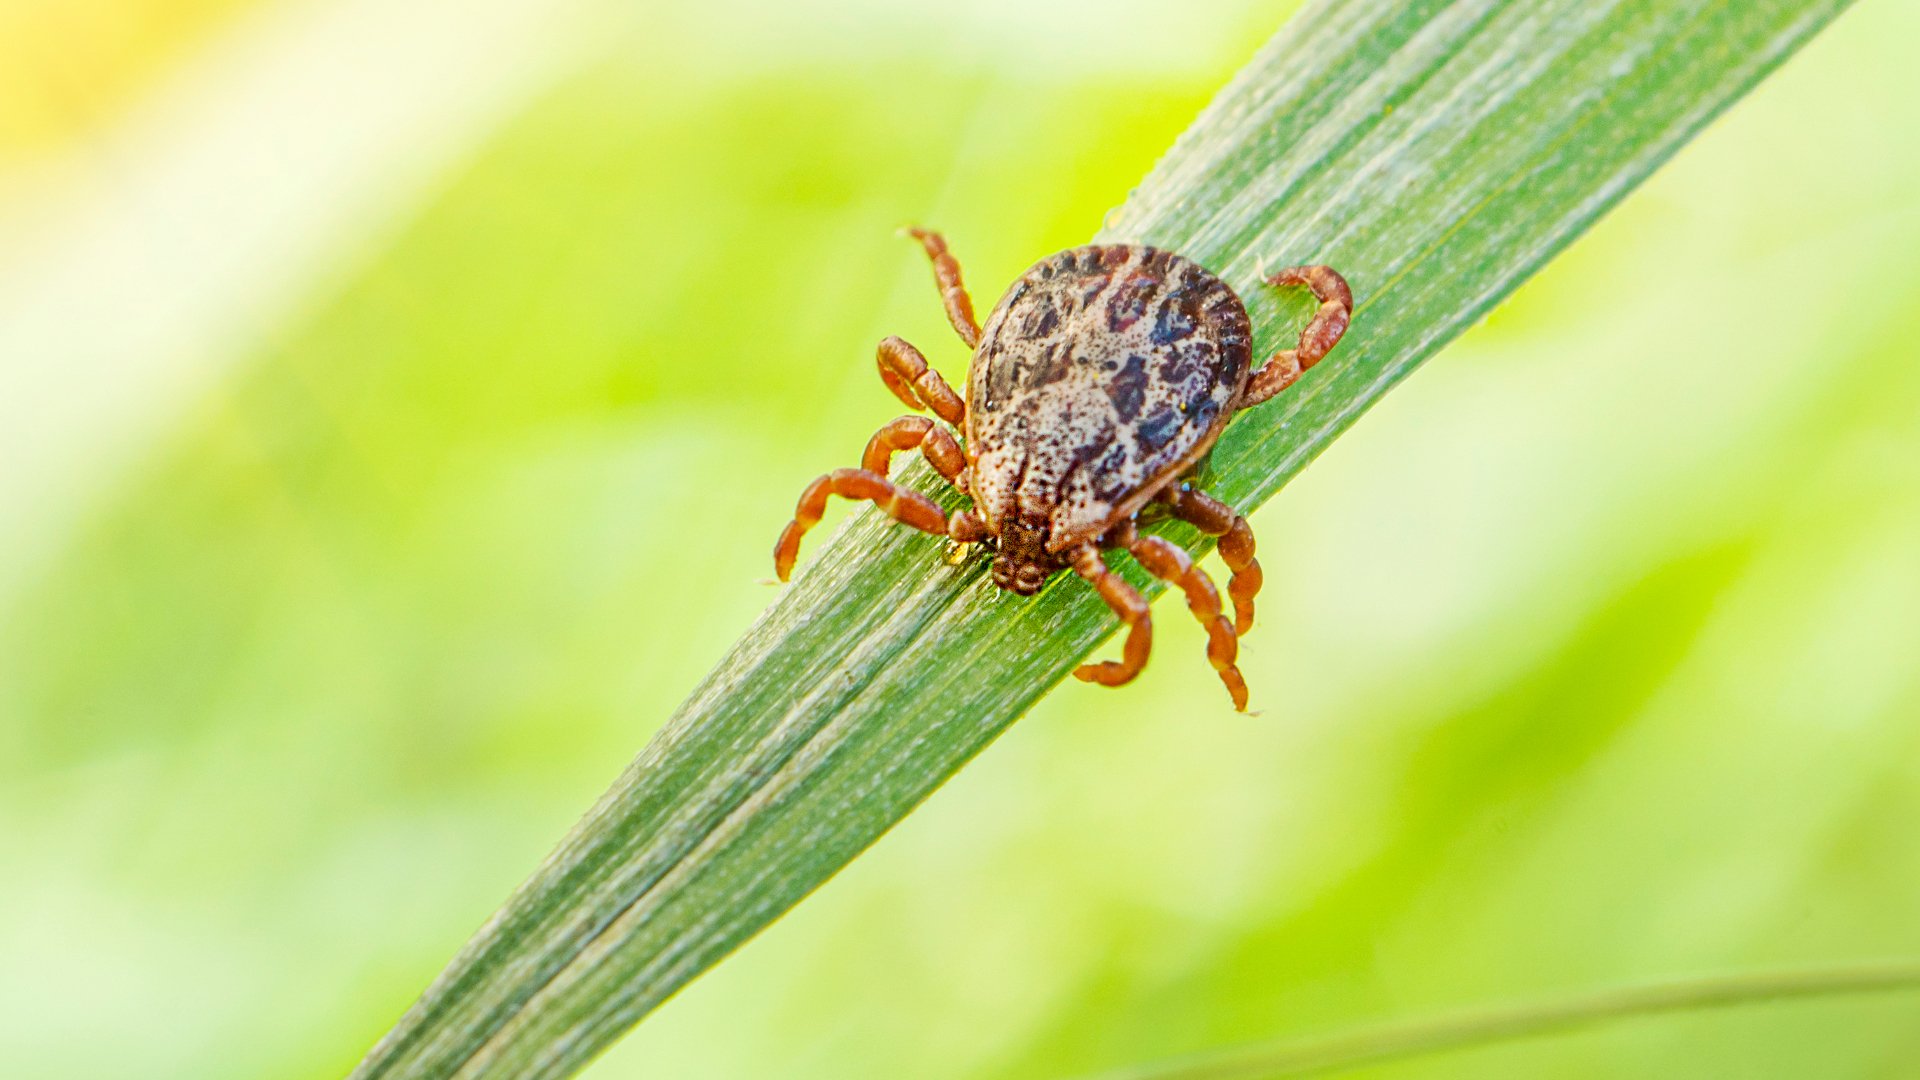 It’s Tick Season Here in Texas - How Do You Keep You & Your Family Safe?